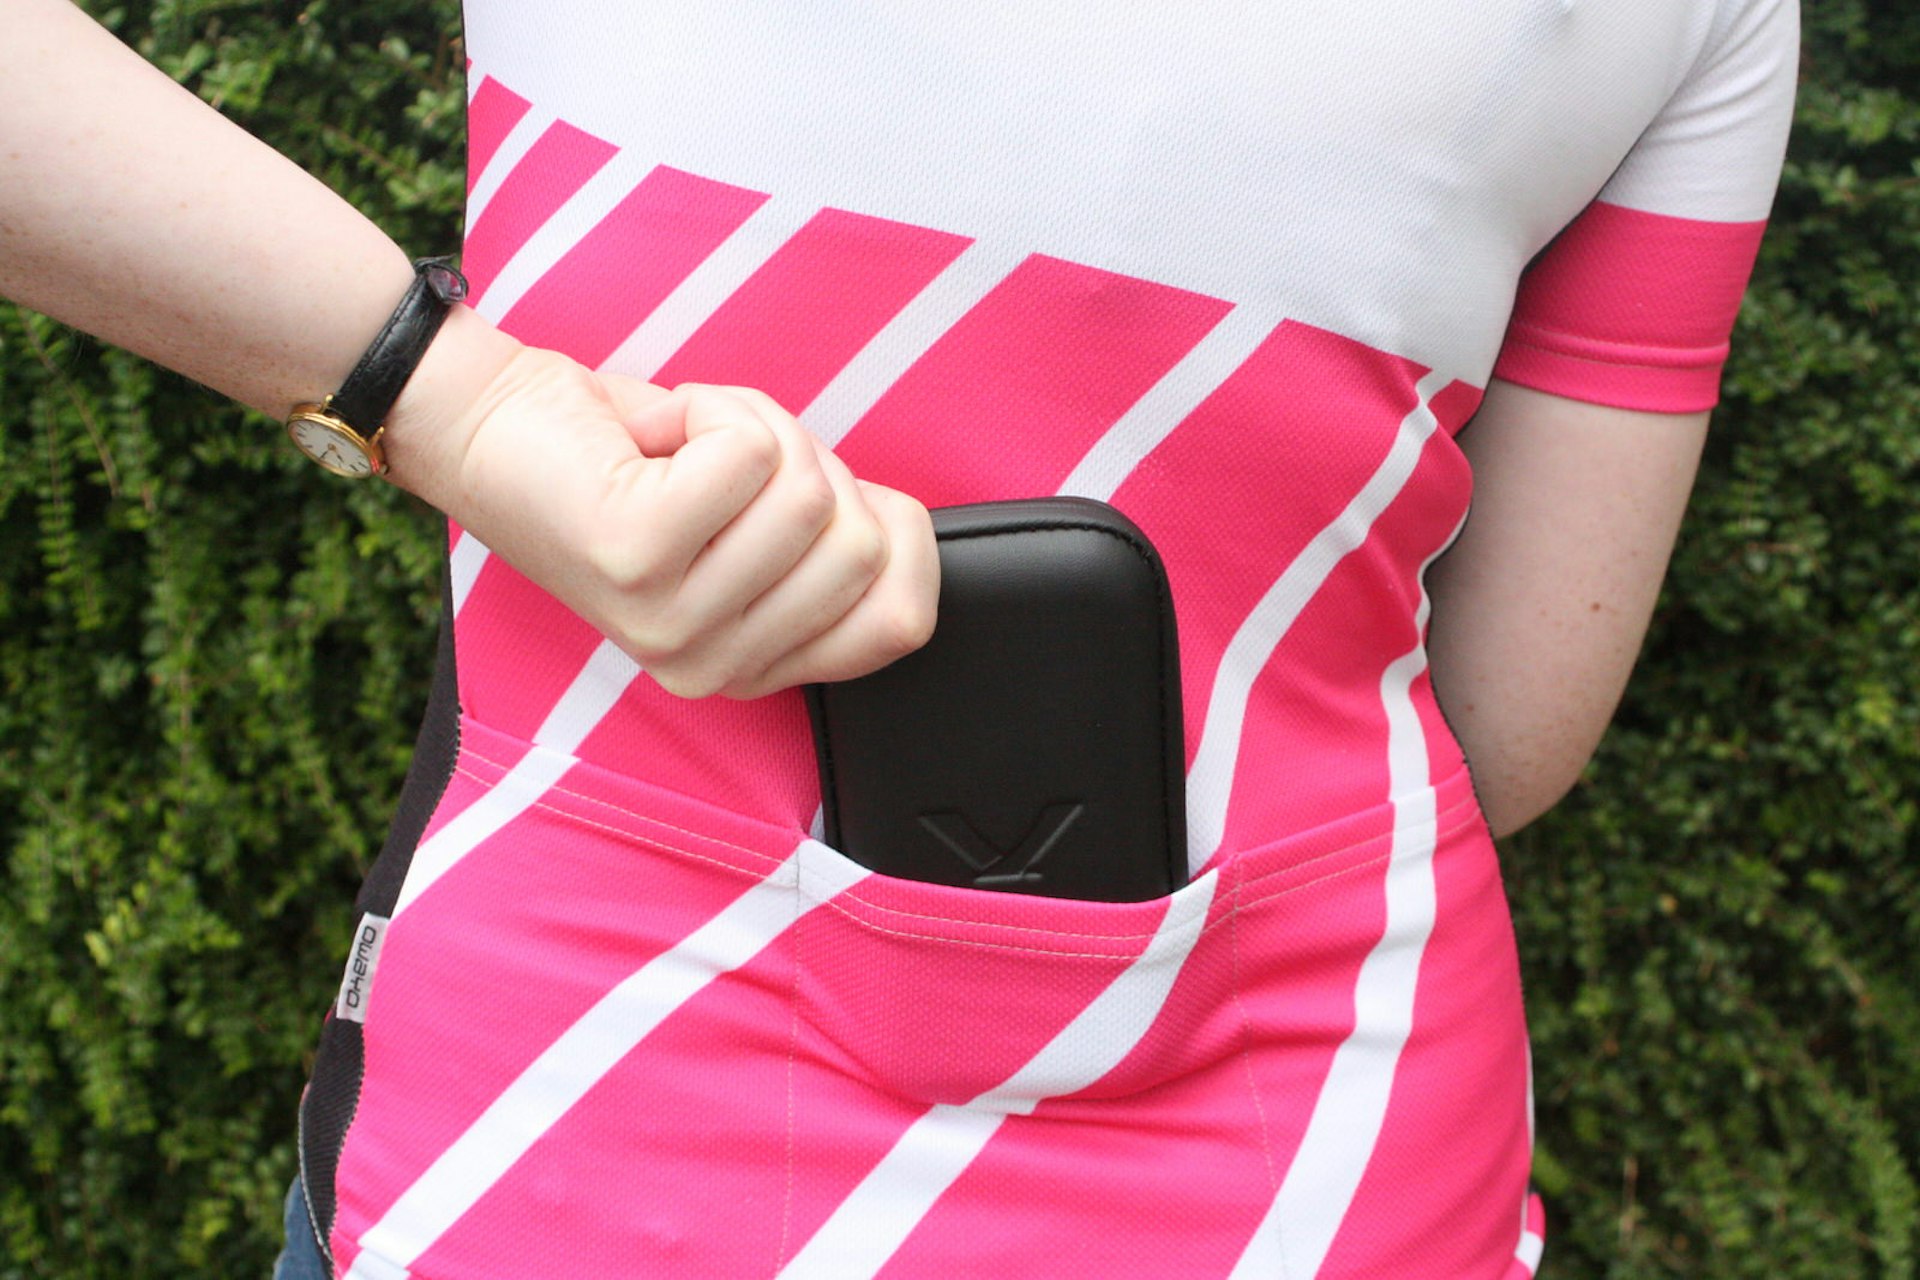 The Velovita Pocket Pack protects your phone from knocks and spills © David Else / Lonely Planet